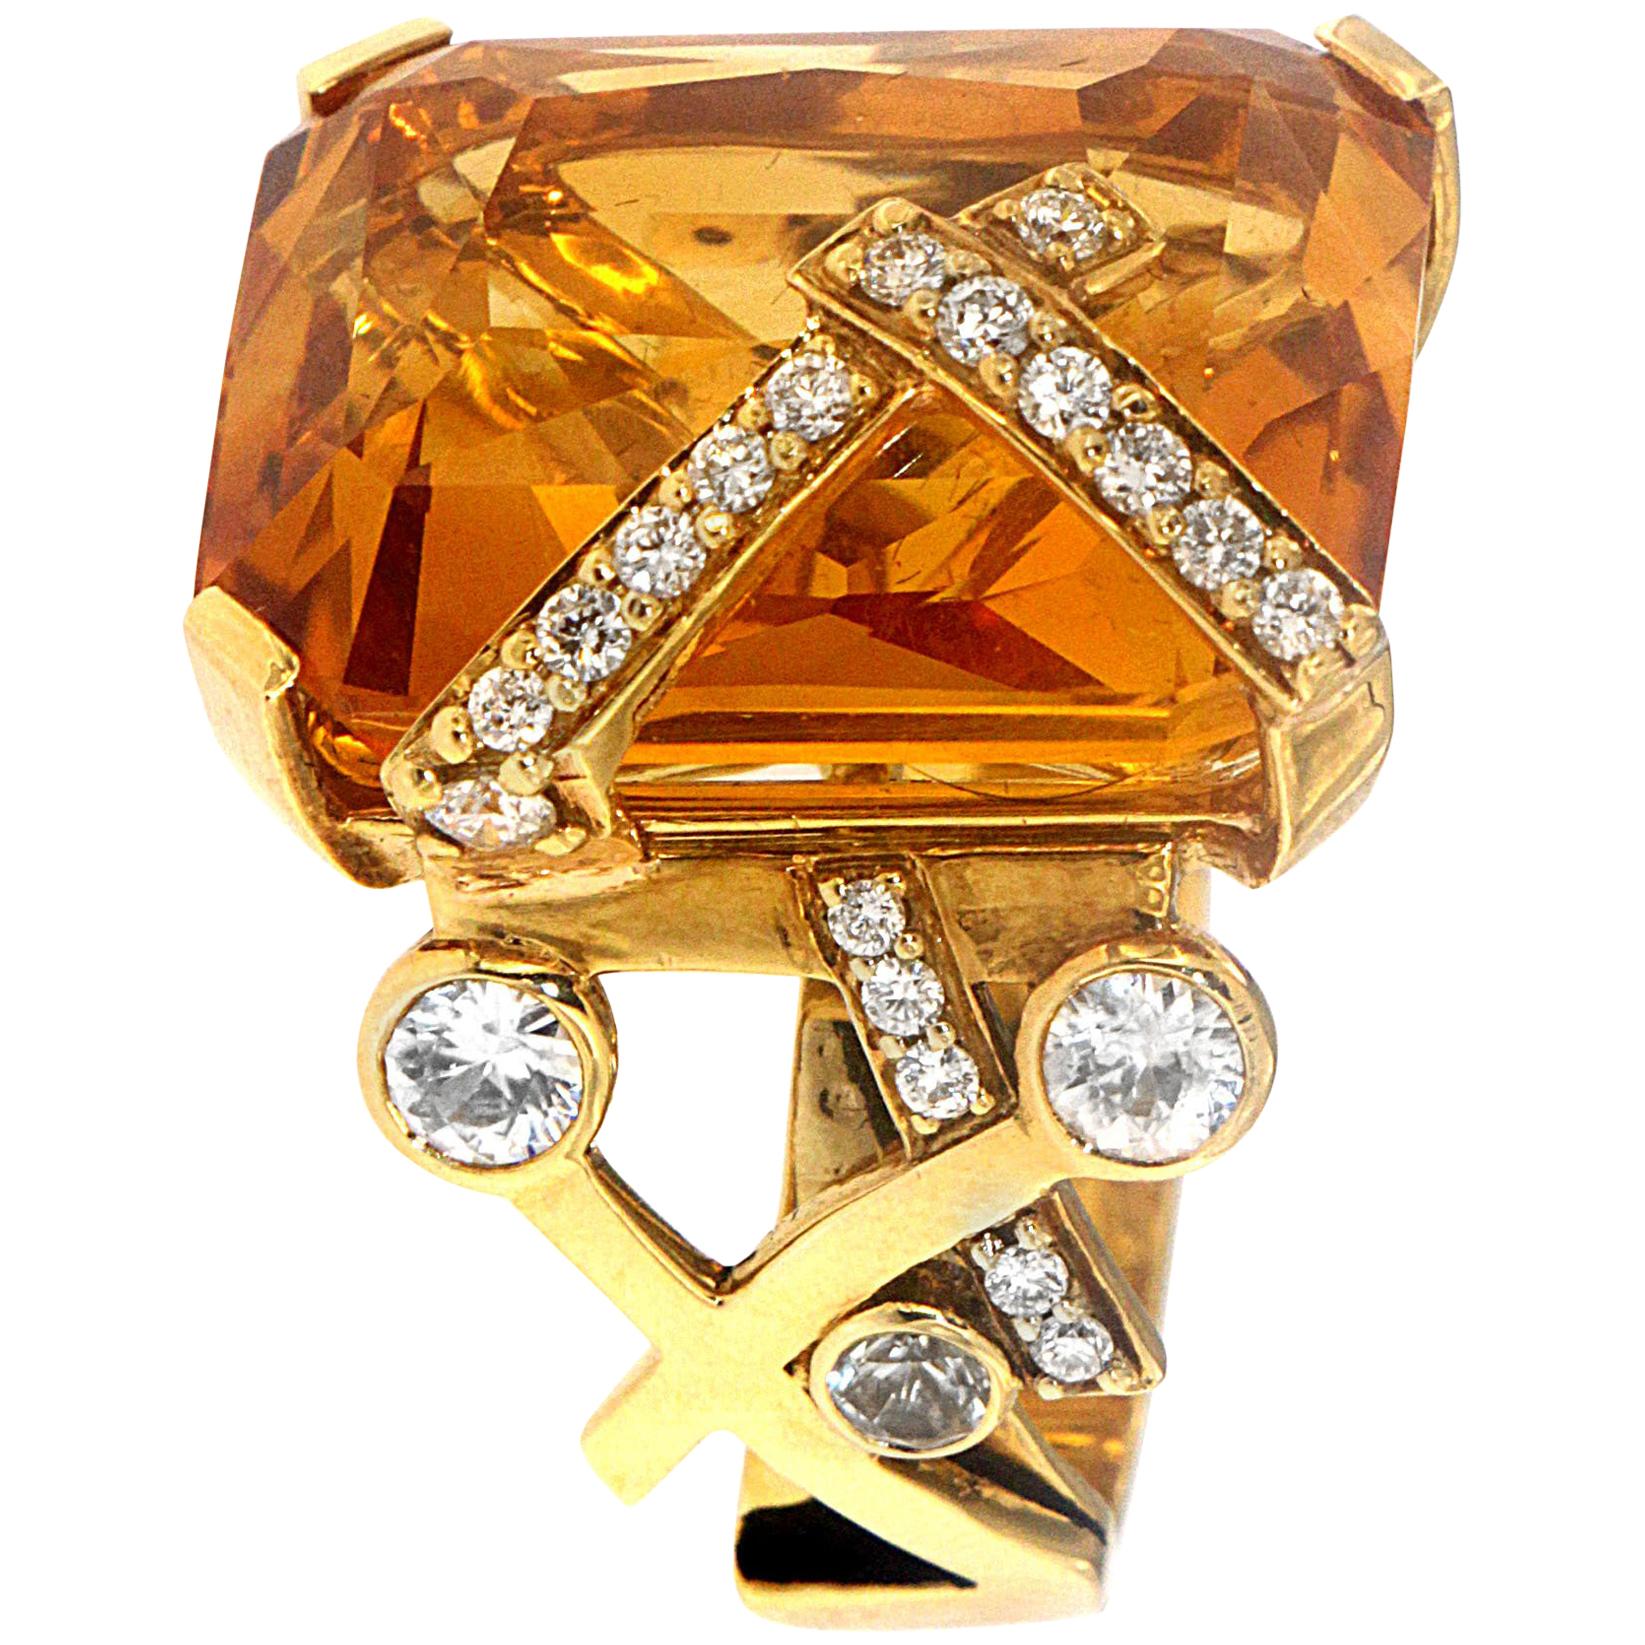 Zorab Creation, the 26.30 Carat Citrine Candy Ring with Diamonds and Sapphires